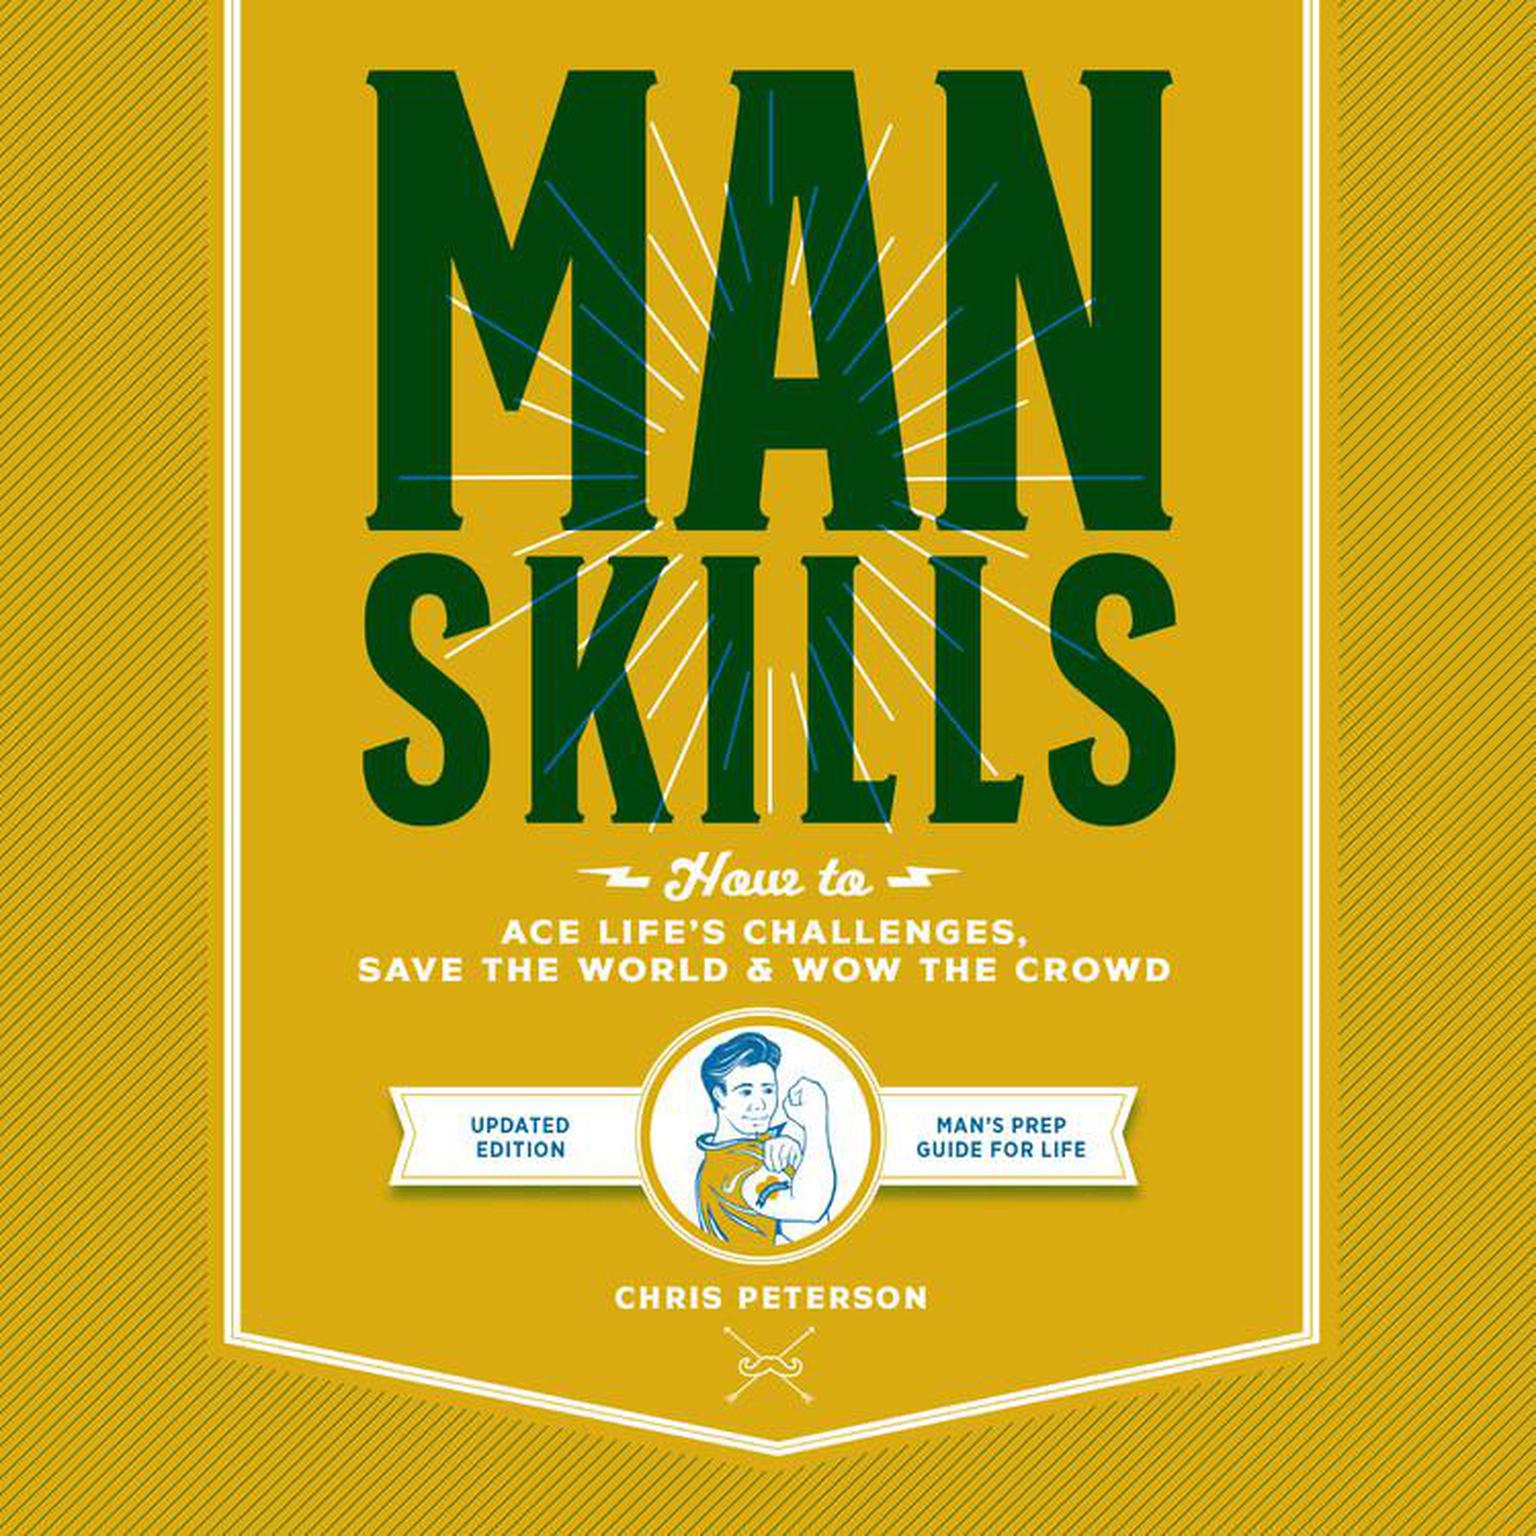 Manskills: How to Avoid Embarrassing Yourself and Impress Everyone Else Audiobook, by Chris Peterson